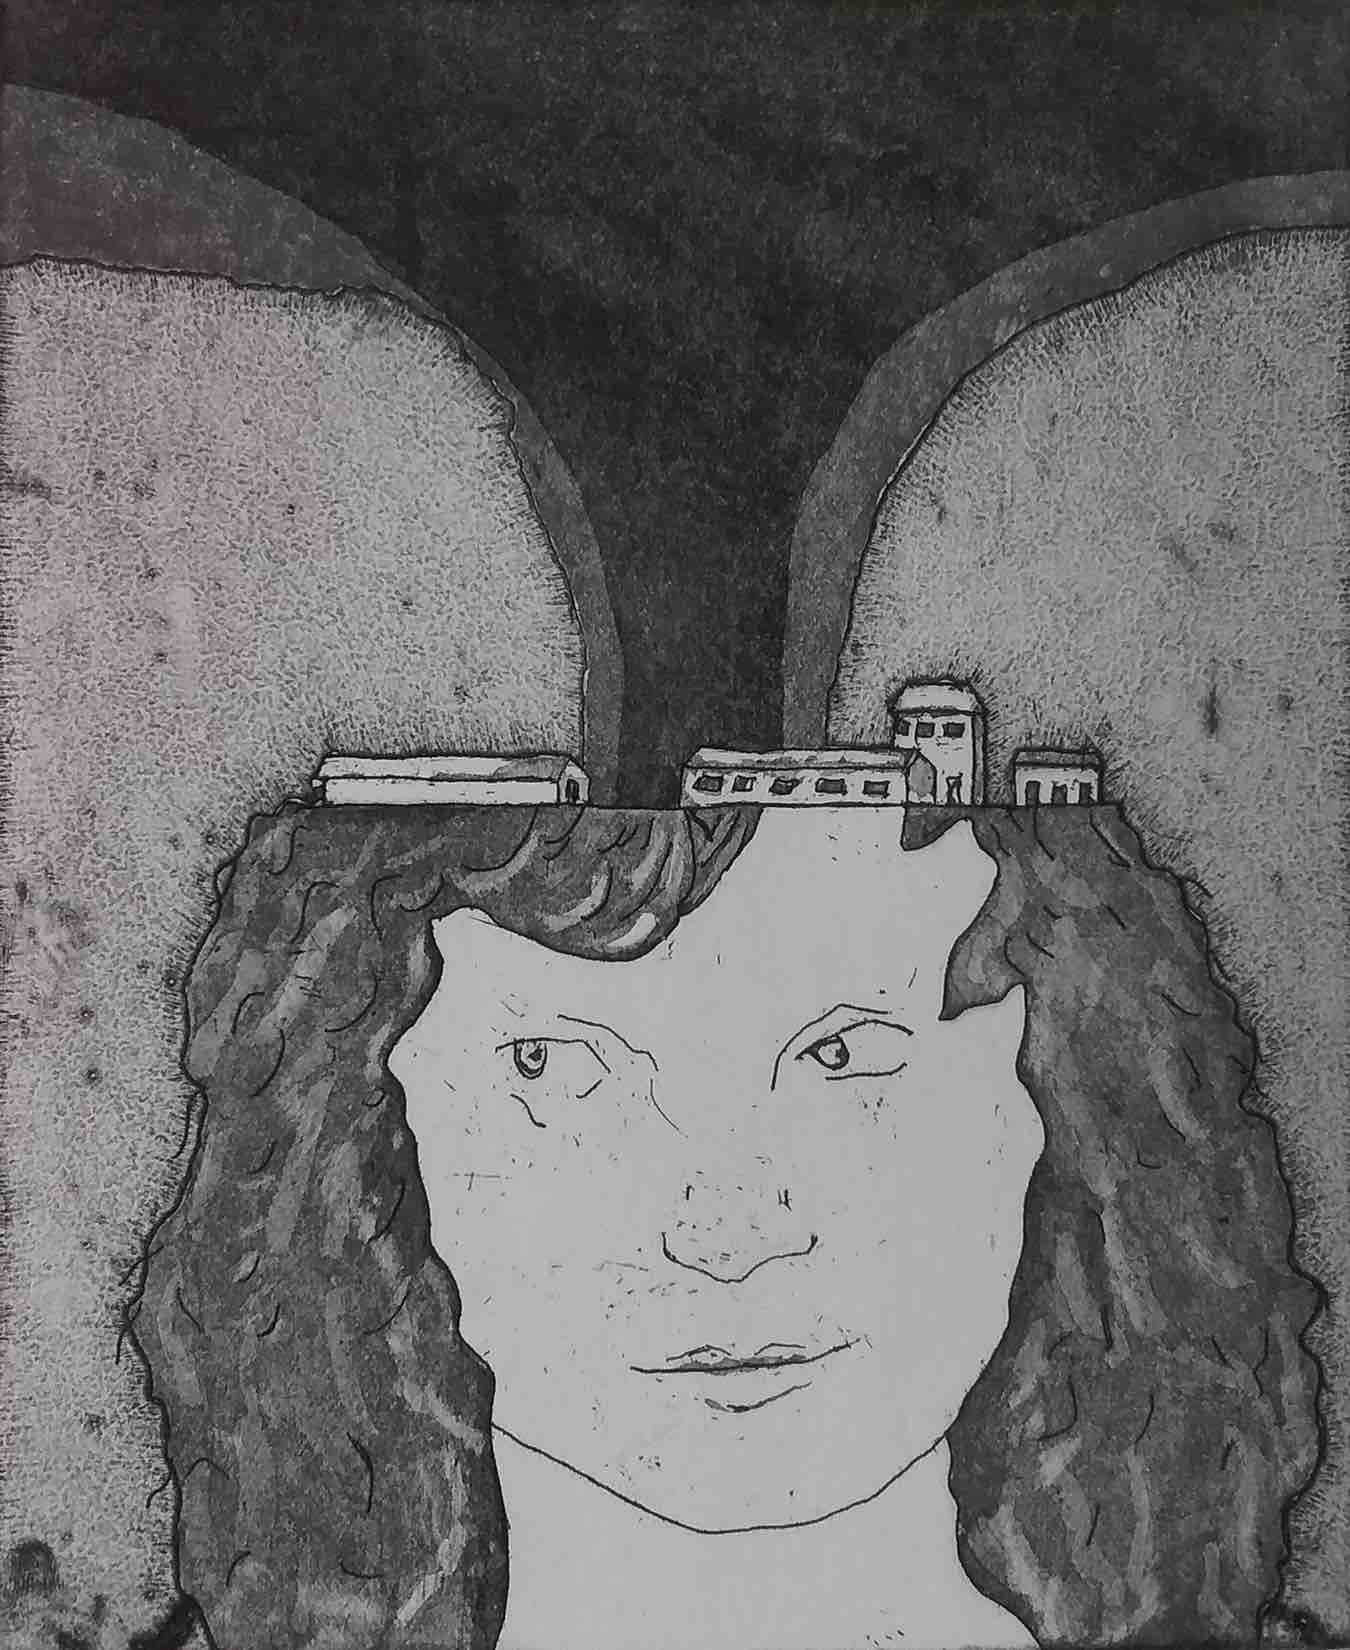 This is a simple line drawing print, black on grey. A young woman with wavy dark hair faces us, looking towards the left. Her head is flattened at the crown, and on that flat field are small farm buildings: barns, sheds, and a granary.